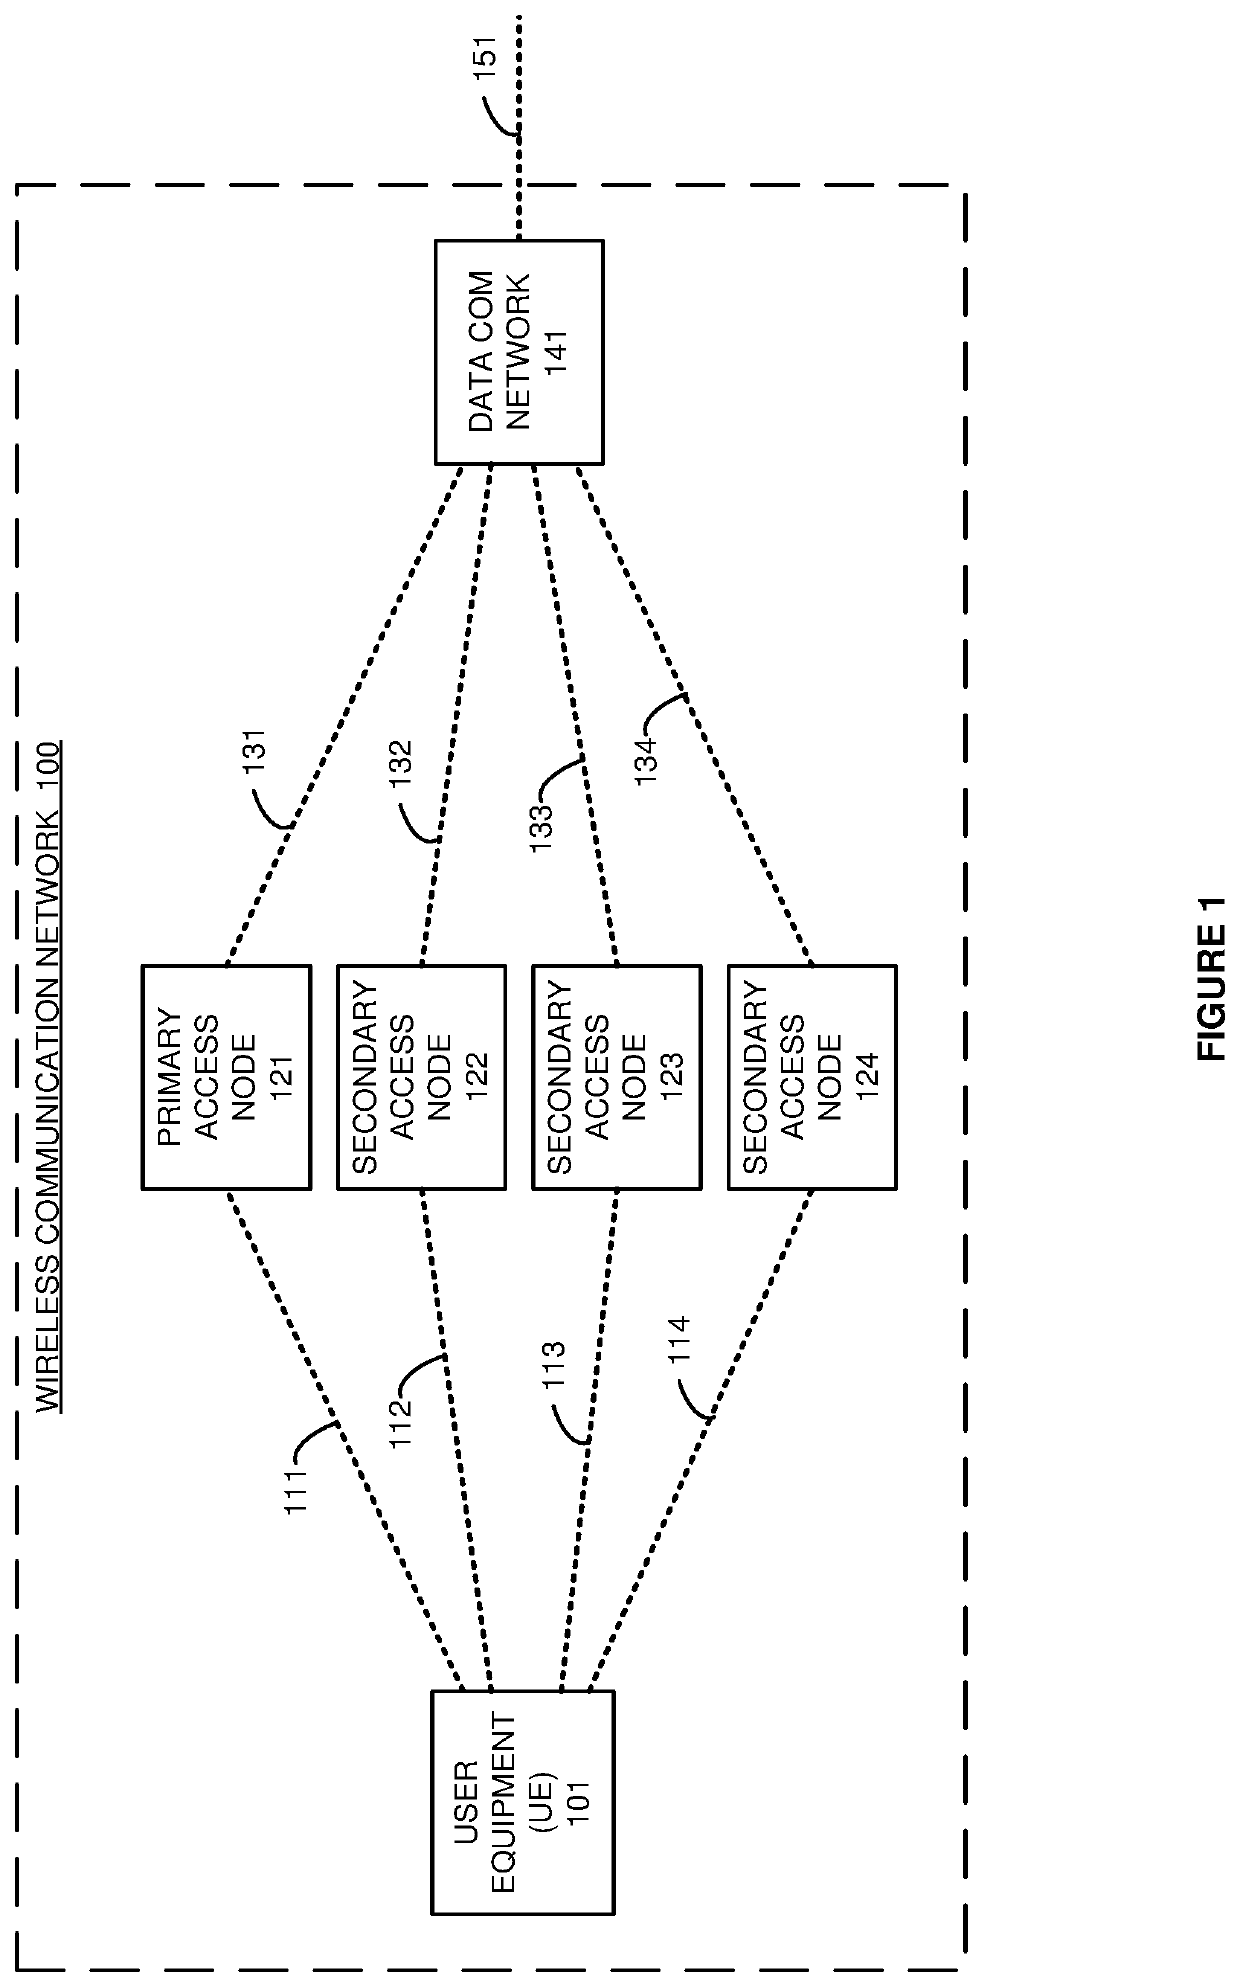 Multi-frequency data communication service over multiple wireless access nodes